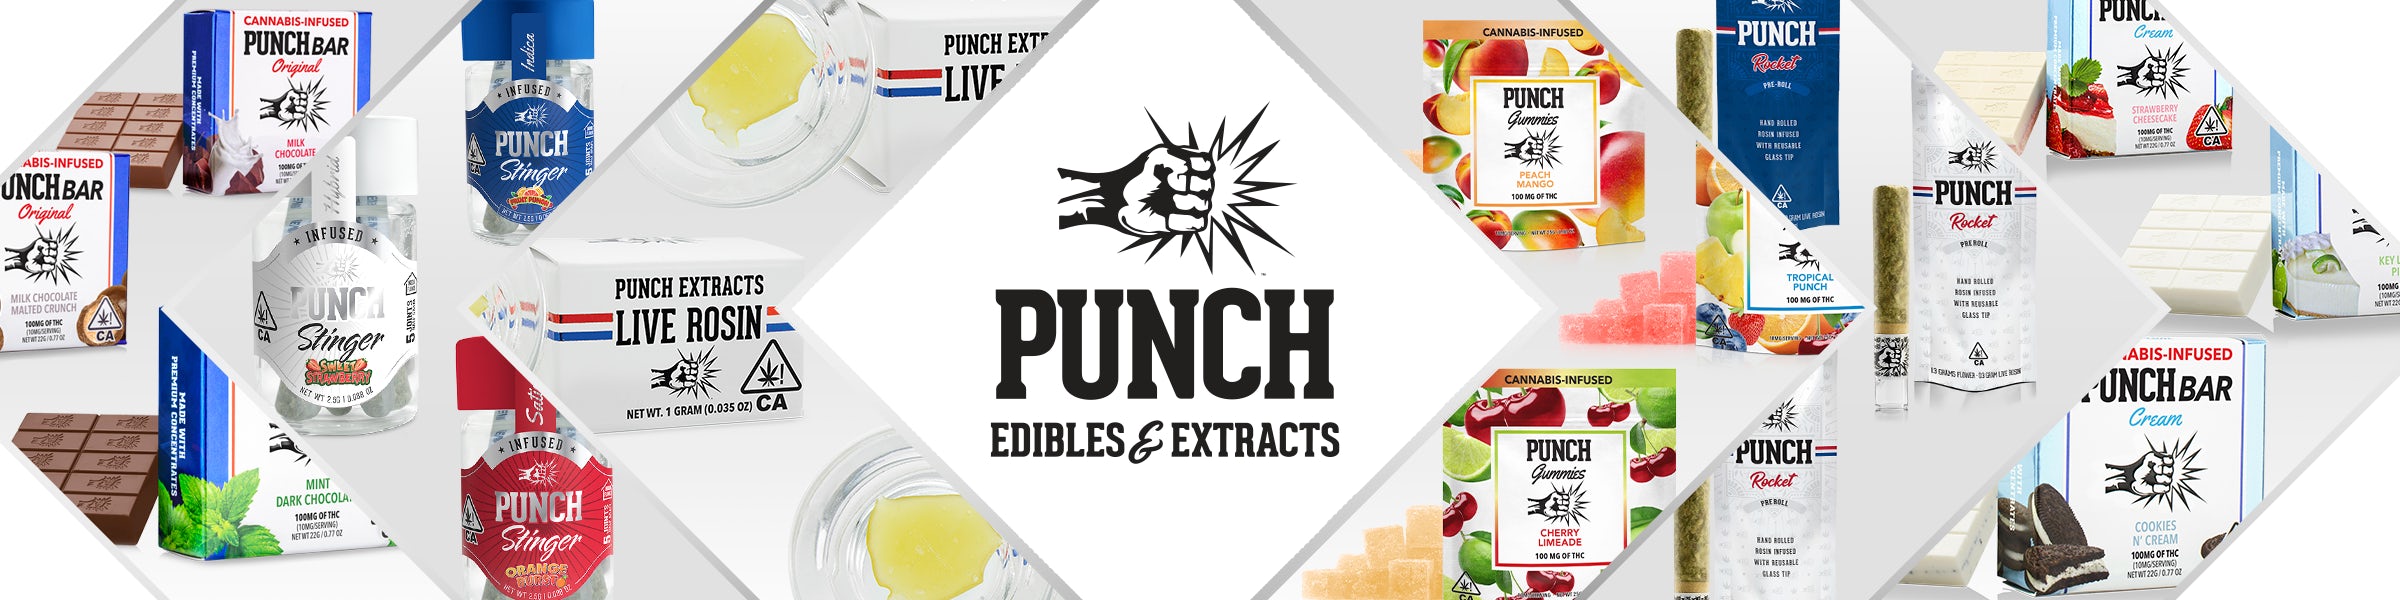 Punch Edibles & Extracts banner